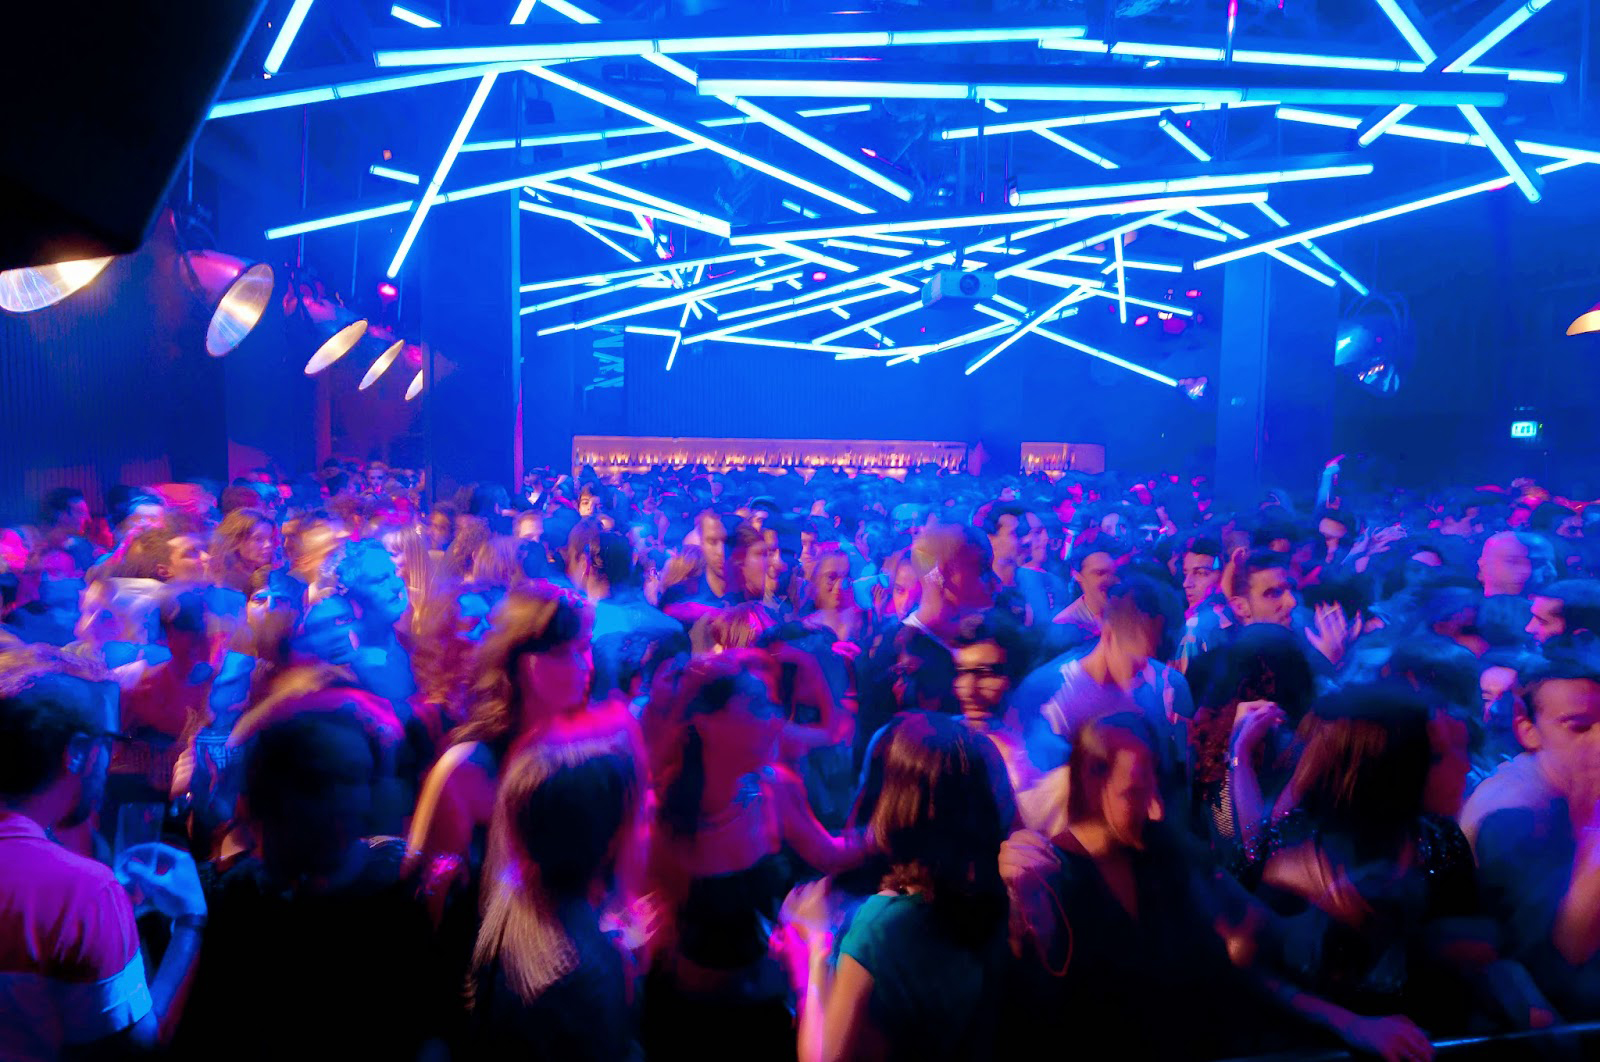 Cult clubs: 12 legendary venues across the world